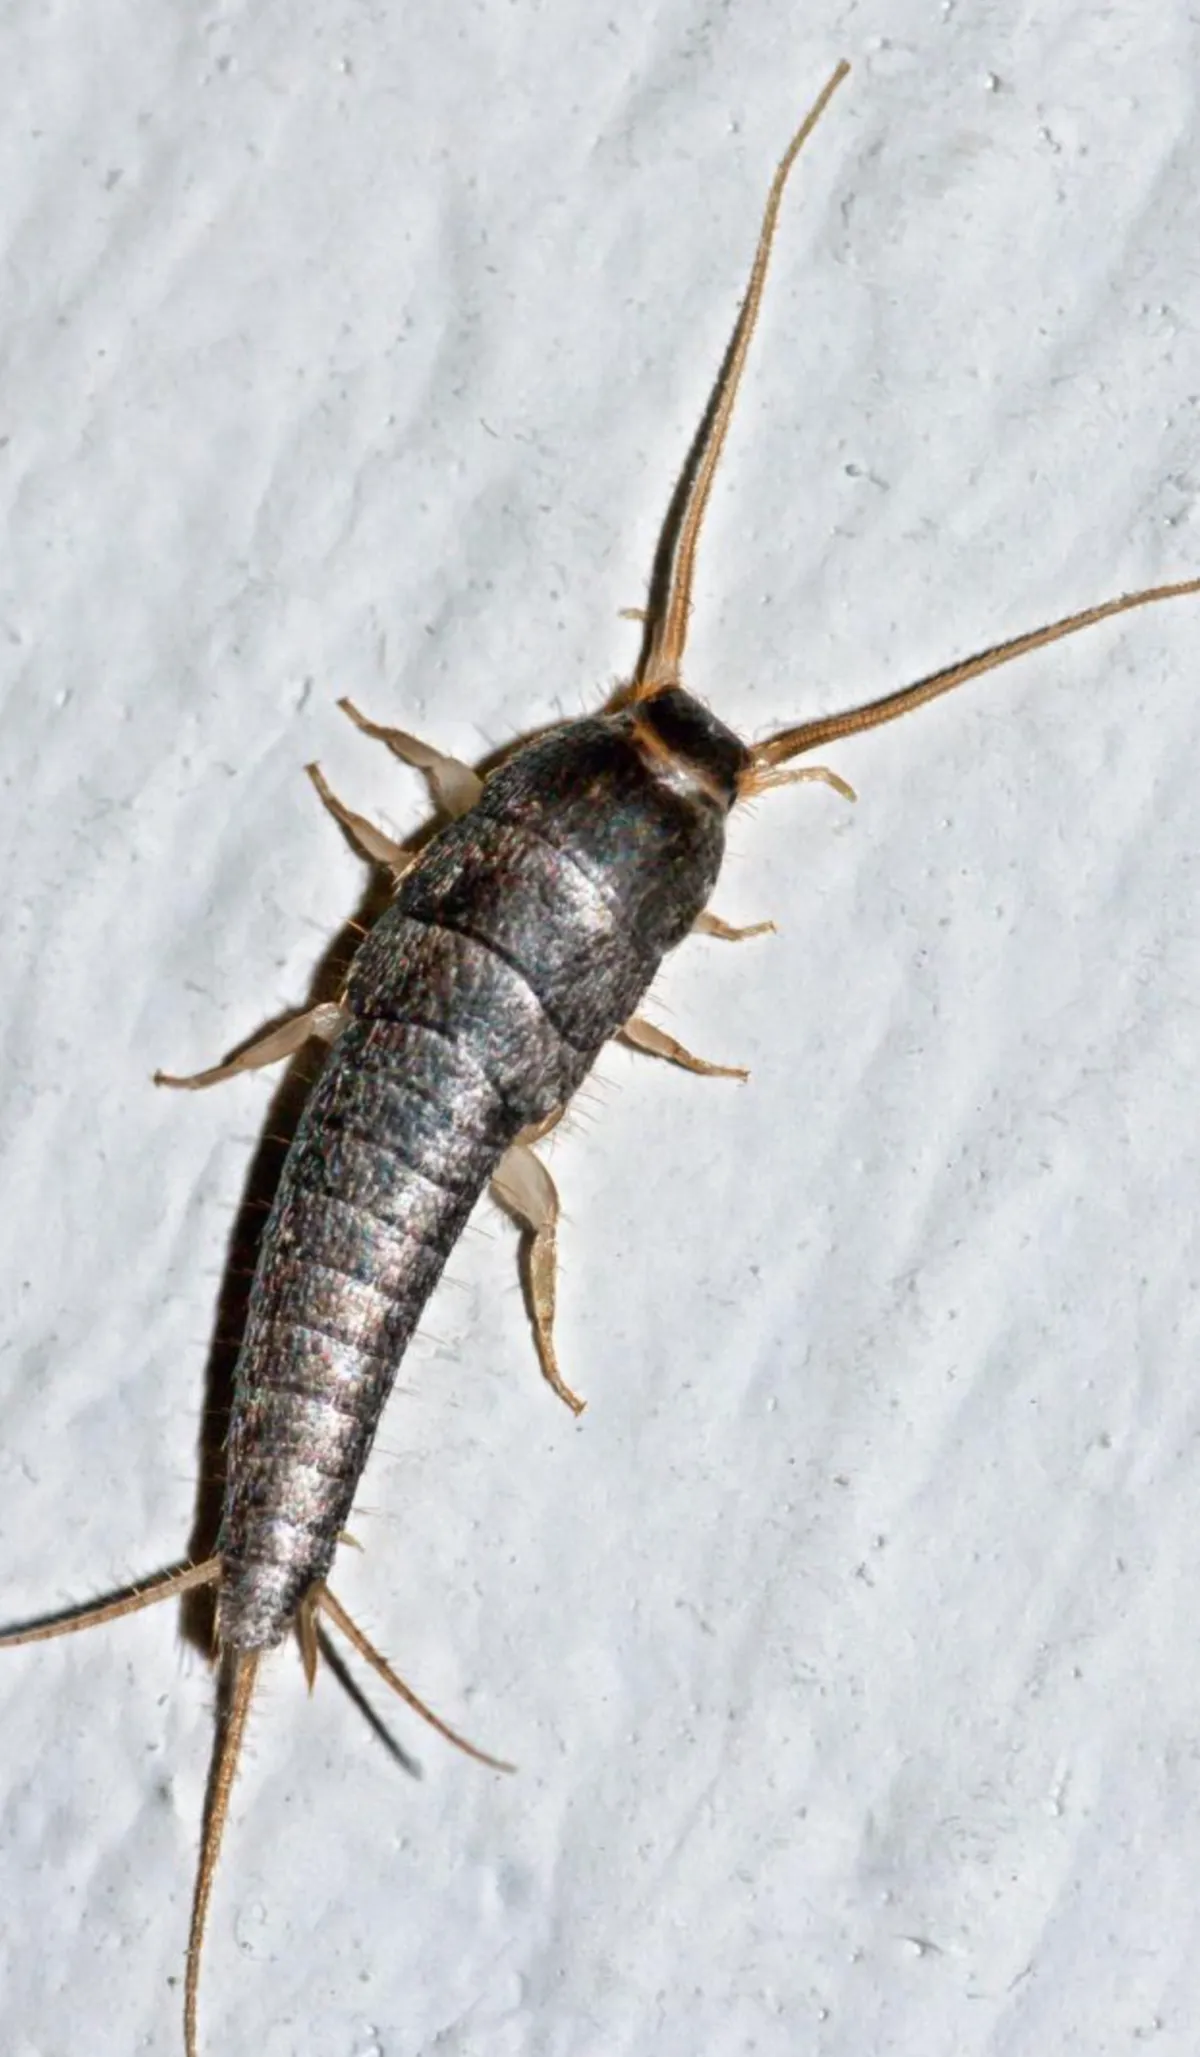 a close up photograph of a victoria silverfish crawling on a white surface